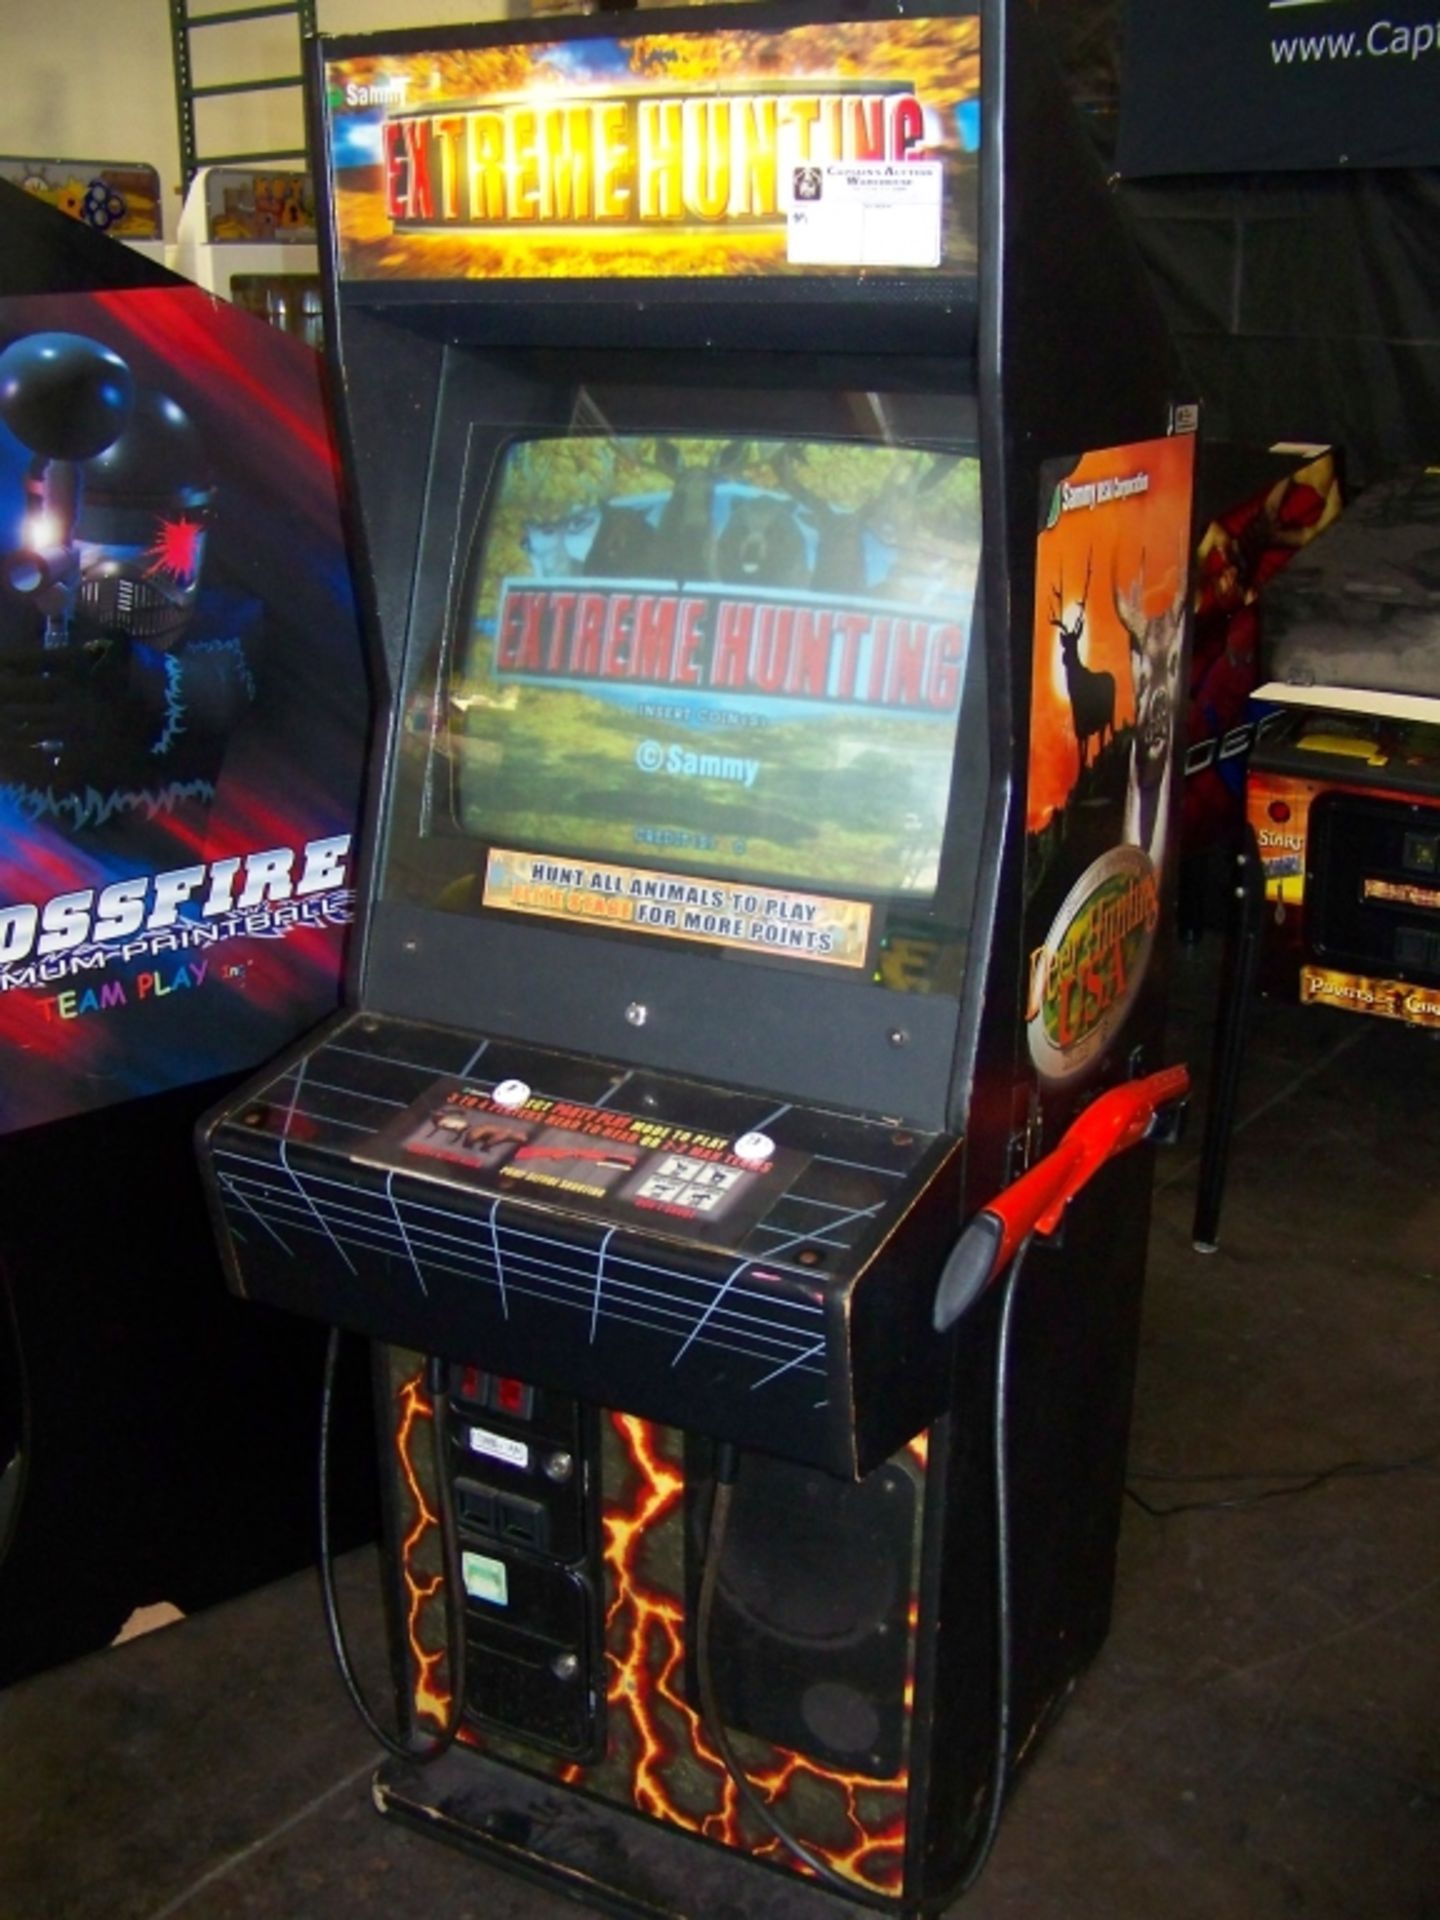 EXTREME HUNTING SHOOTER ARCADE GAME